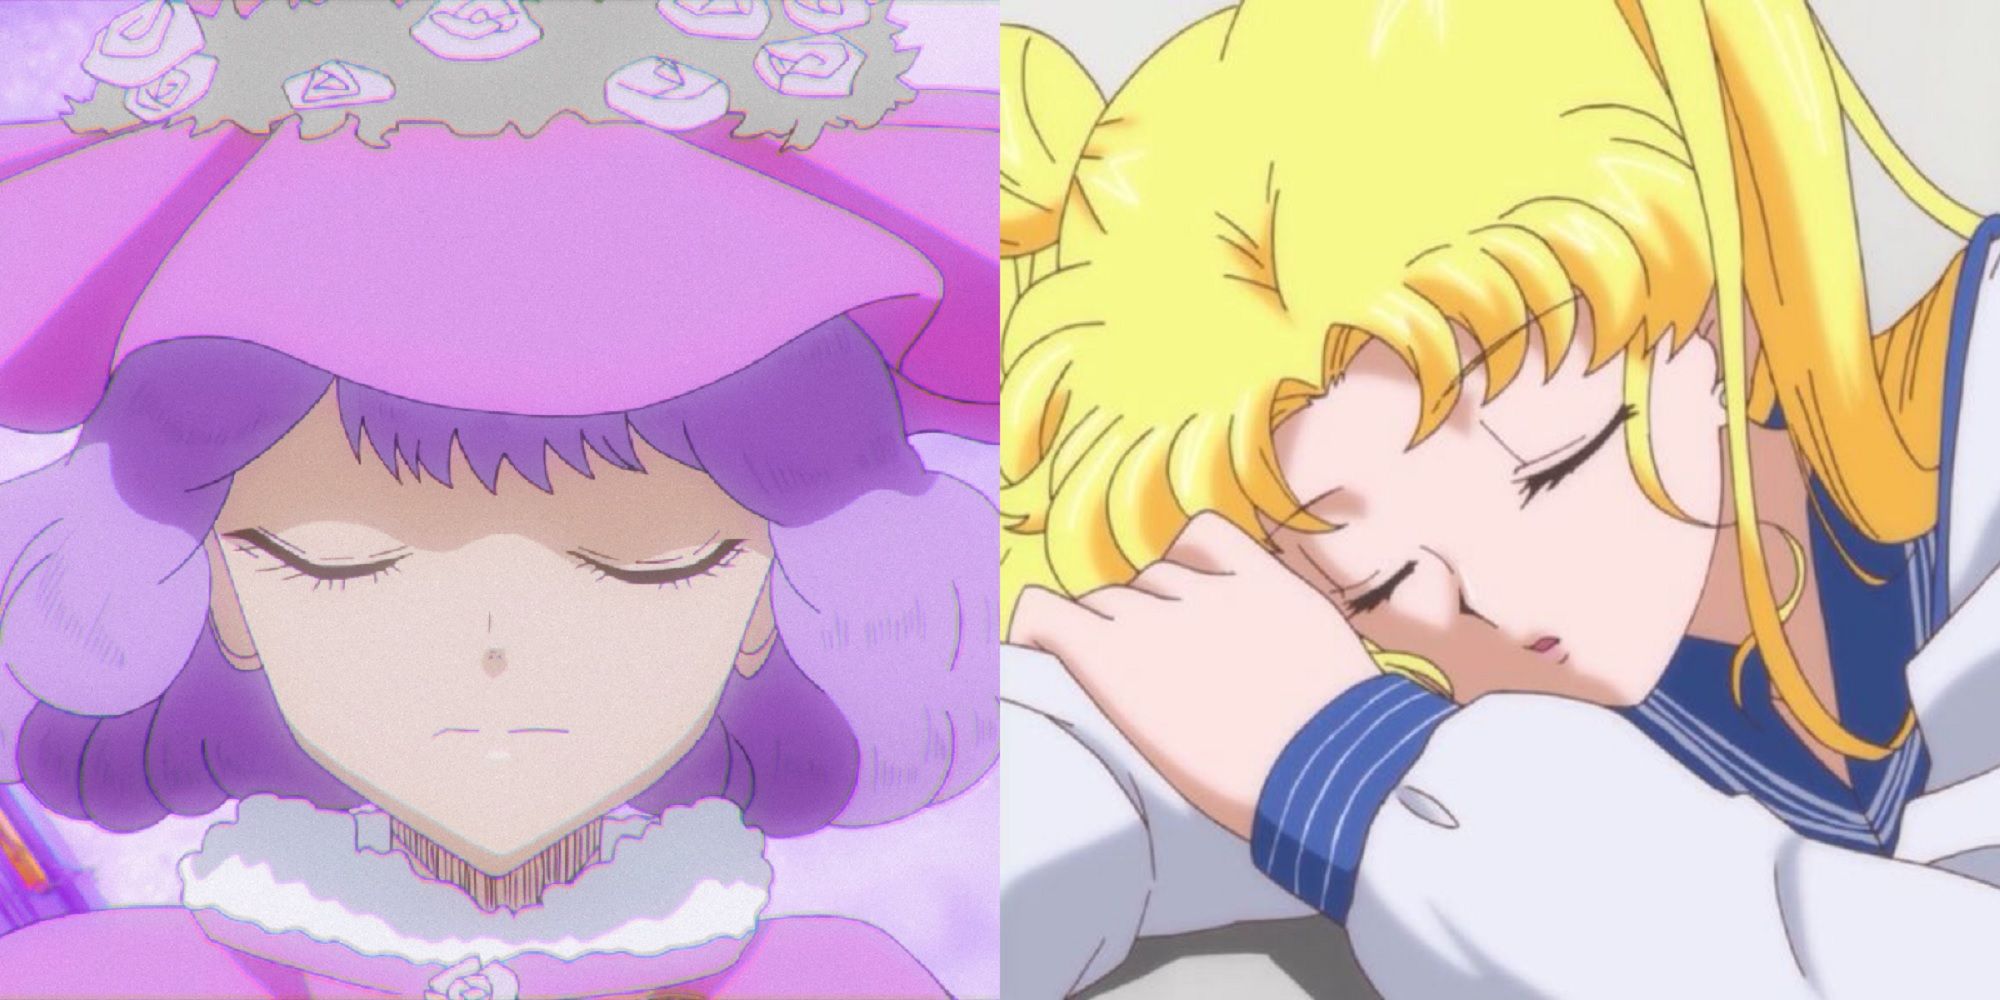 Split image of Black Clover's Dorothy Unsworth with her eyes closed and a sleeping Usagi from Sailor Moon